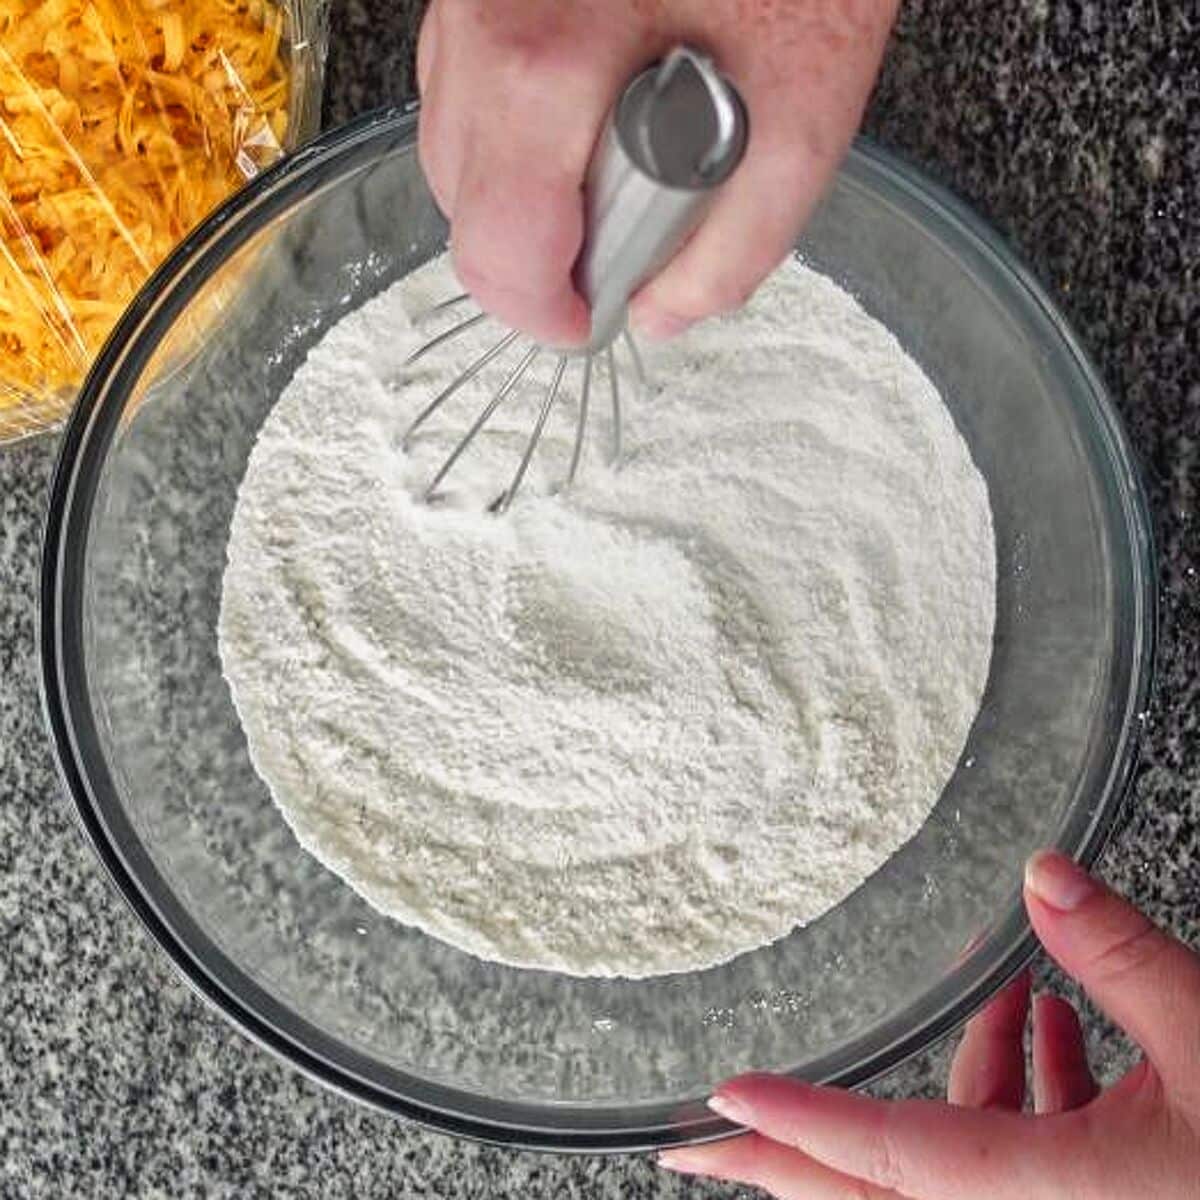 whisking together dry ingredients in large glass bowl.